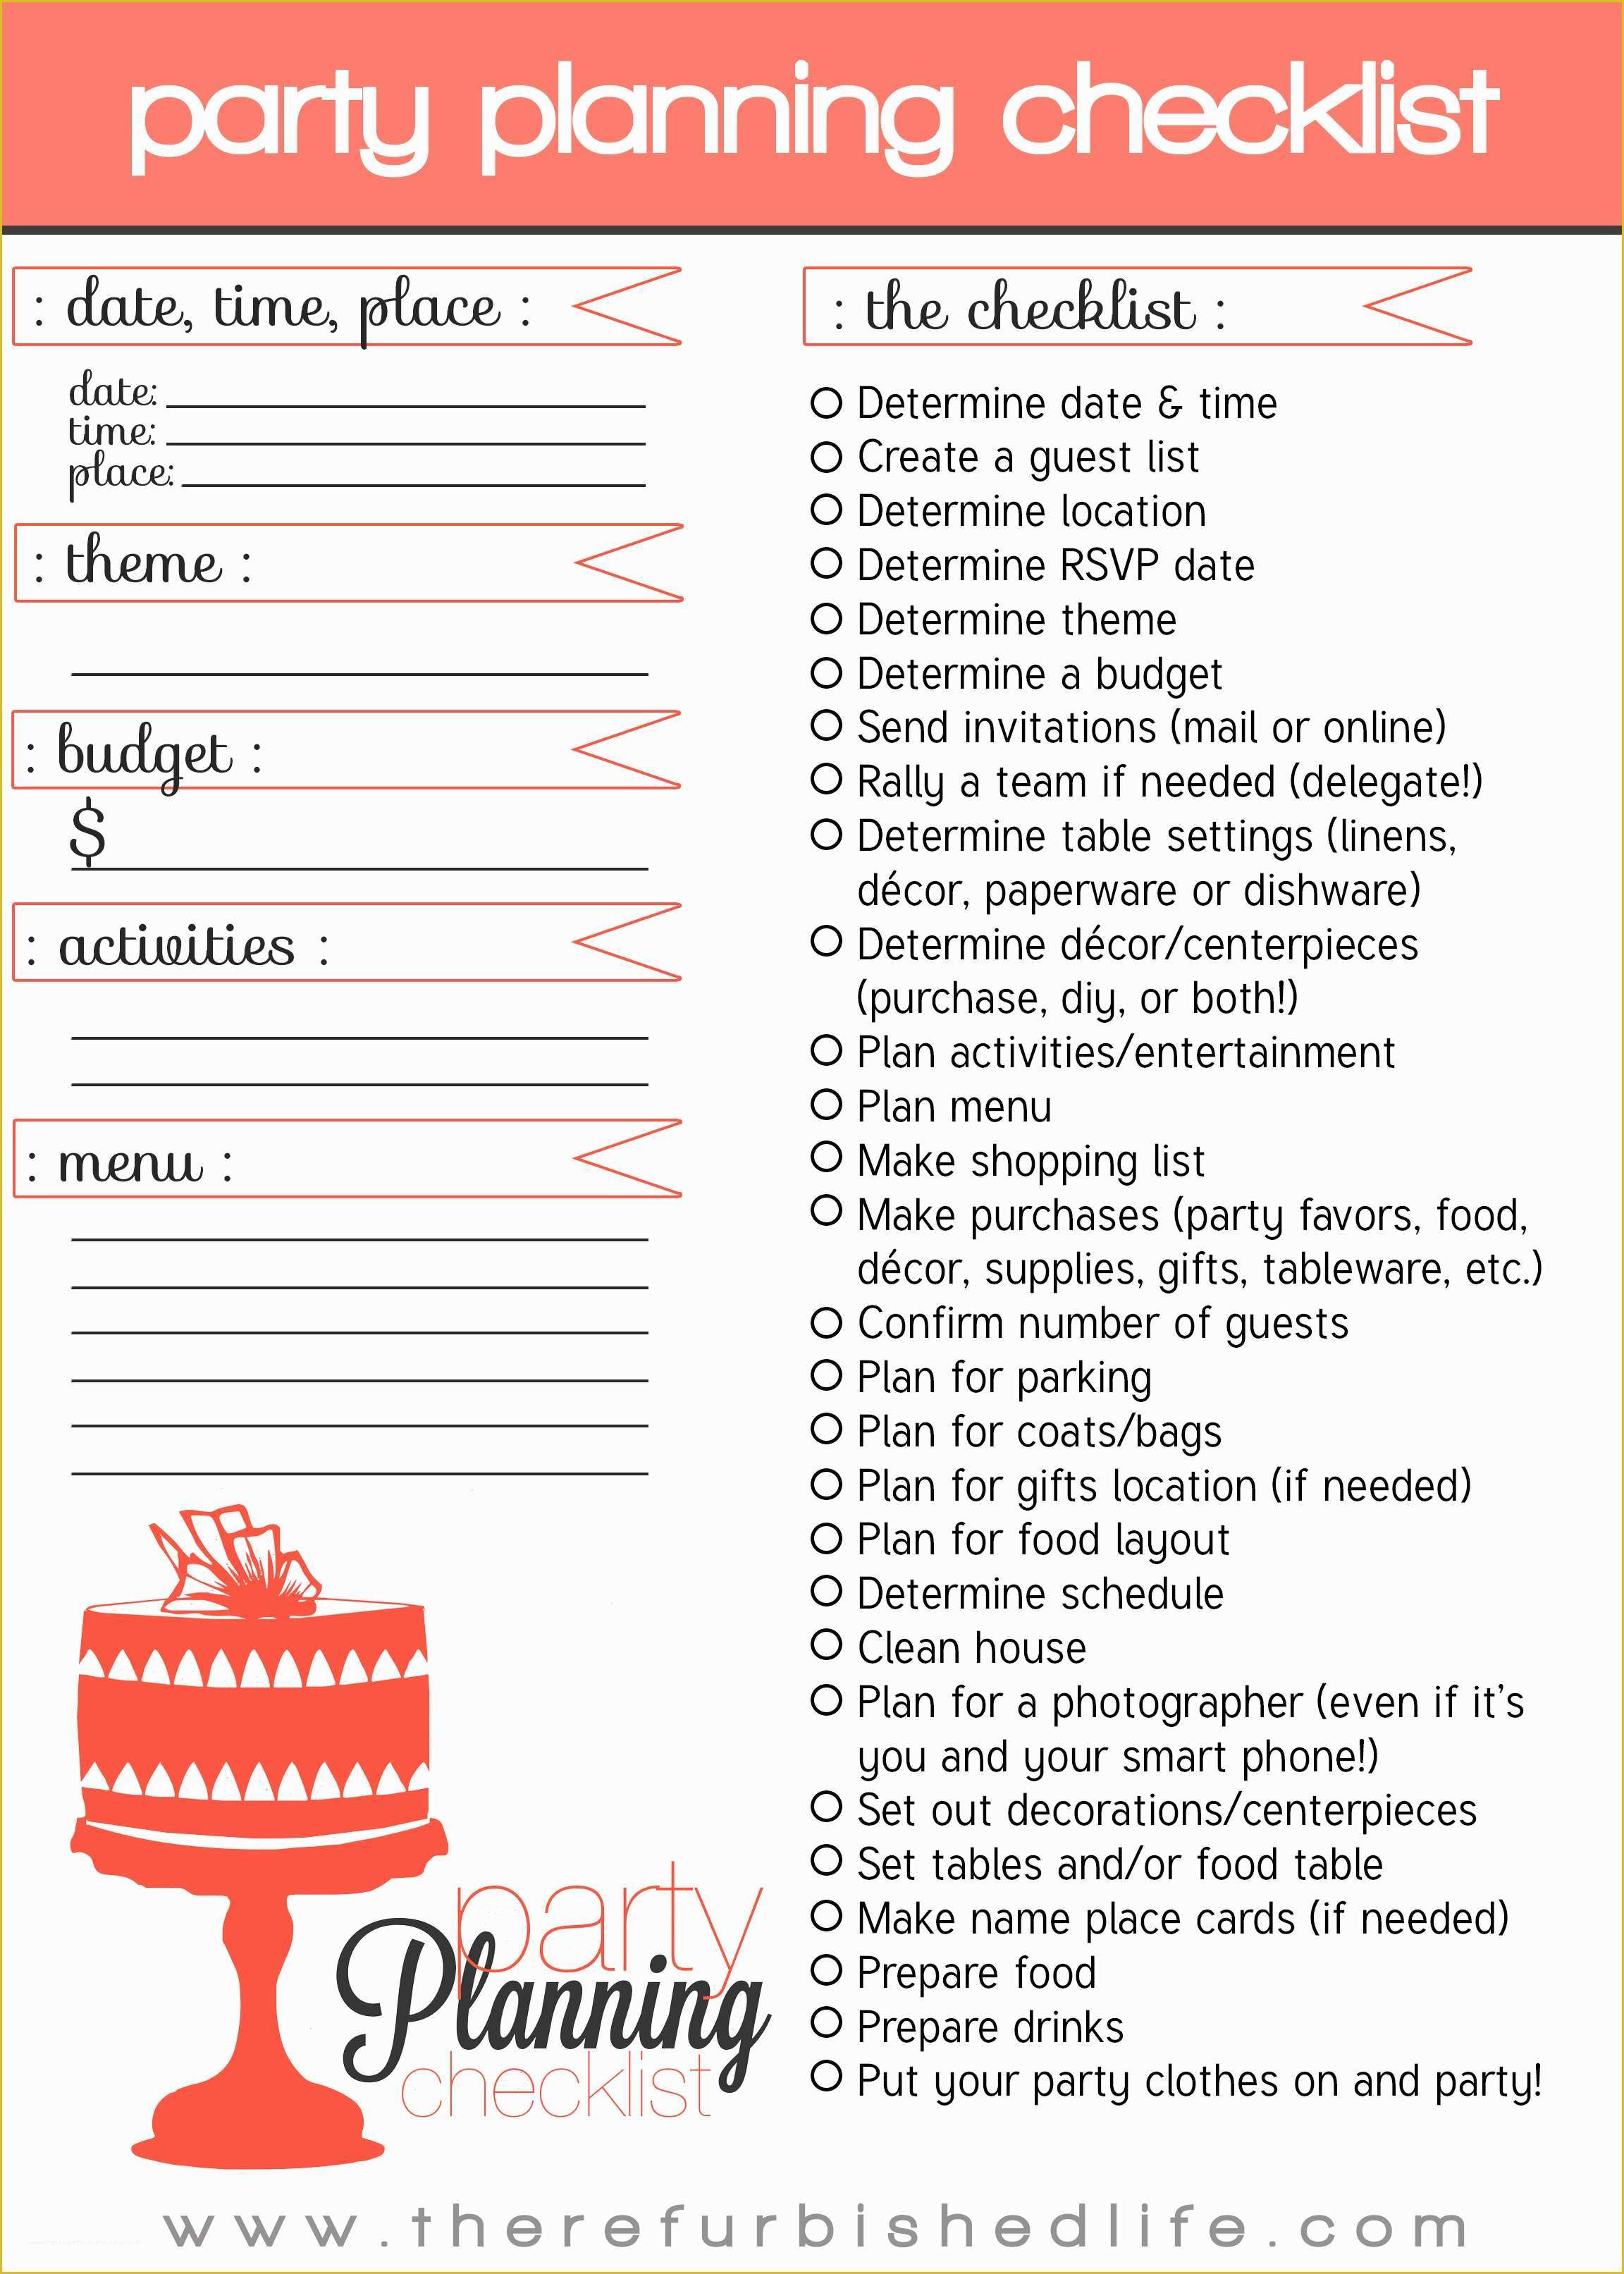 Free Birthday Party Planning Templates Of Party Planning 101 with Printable Checklist – the